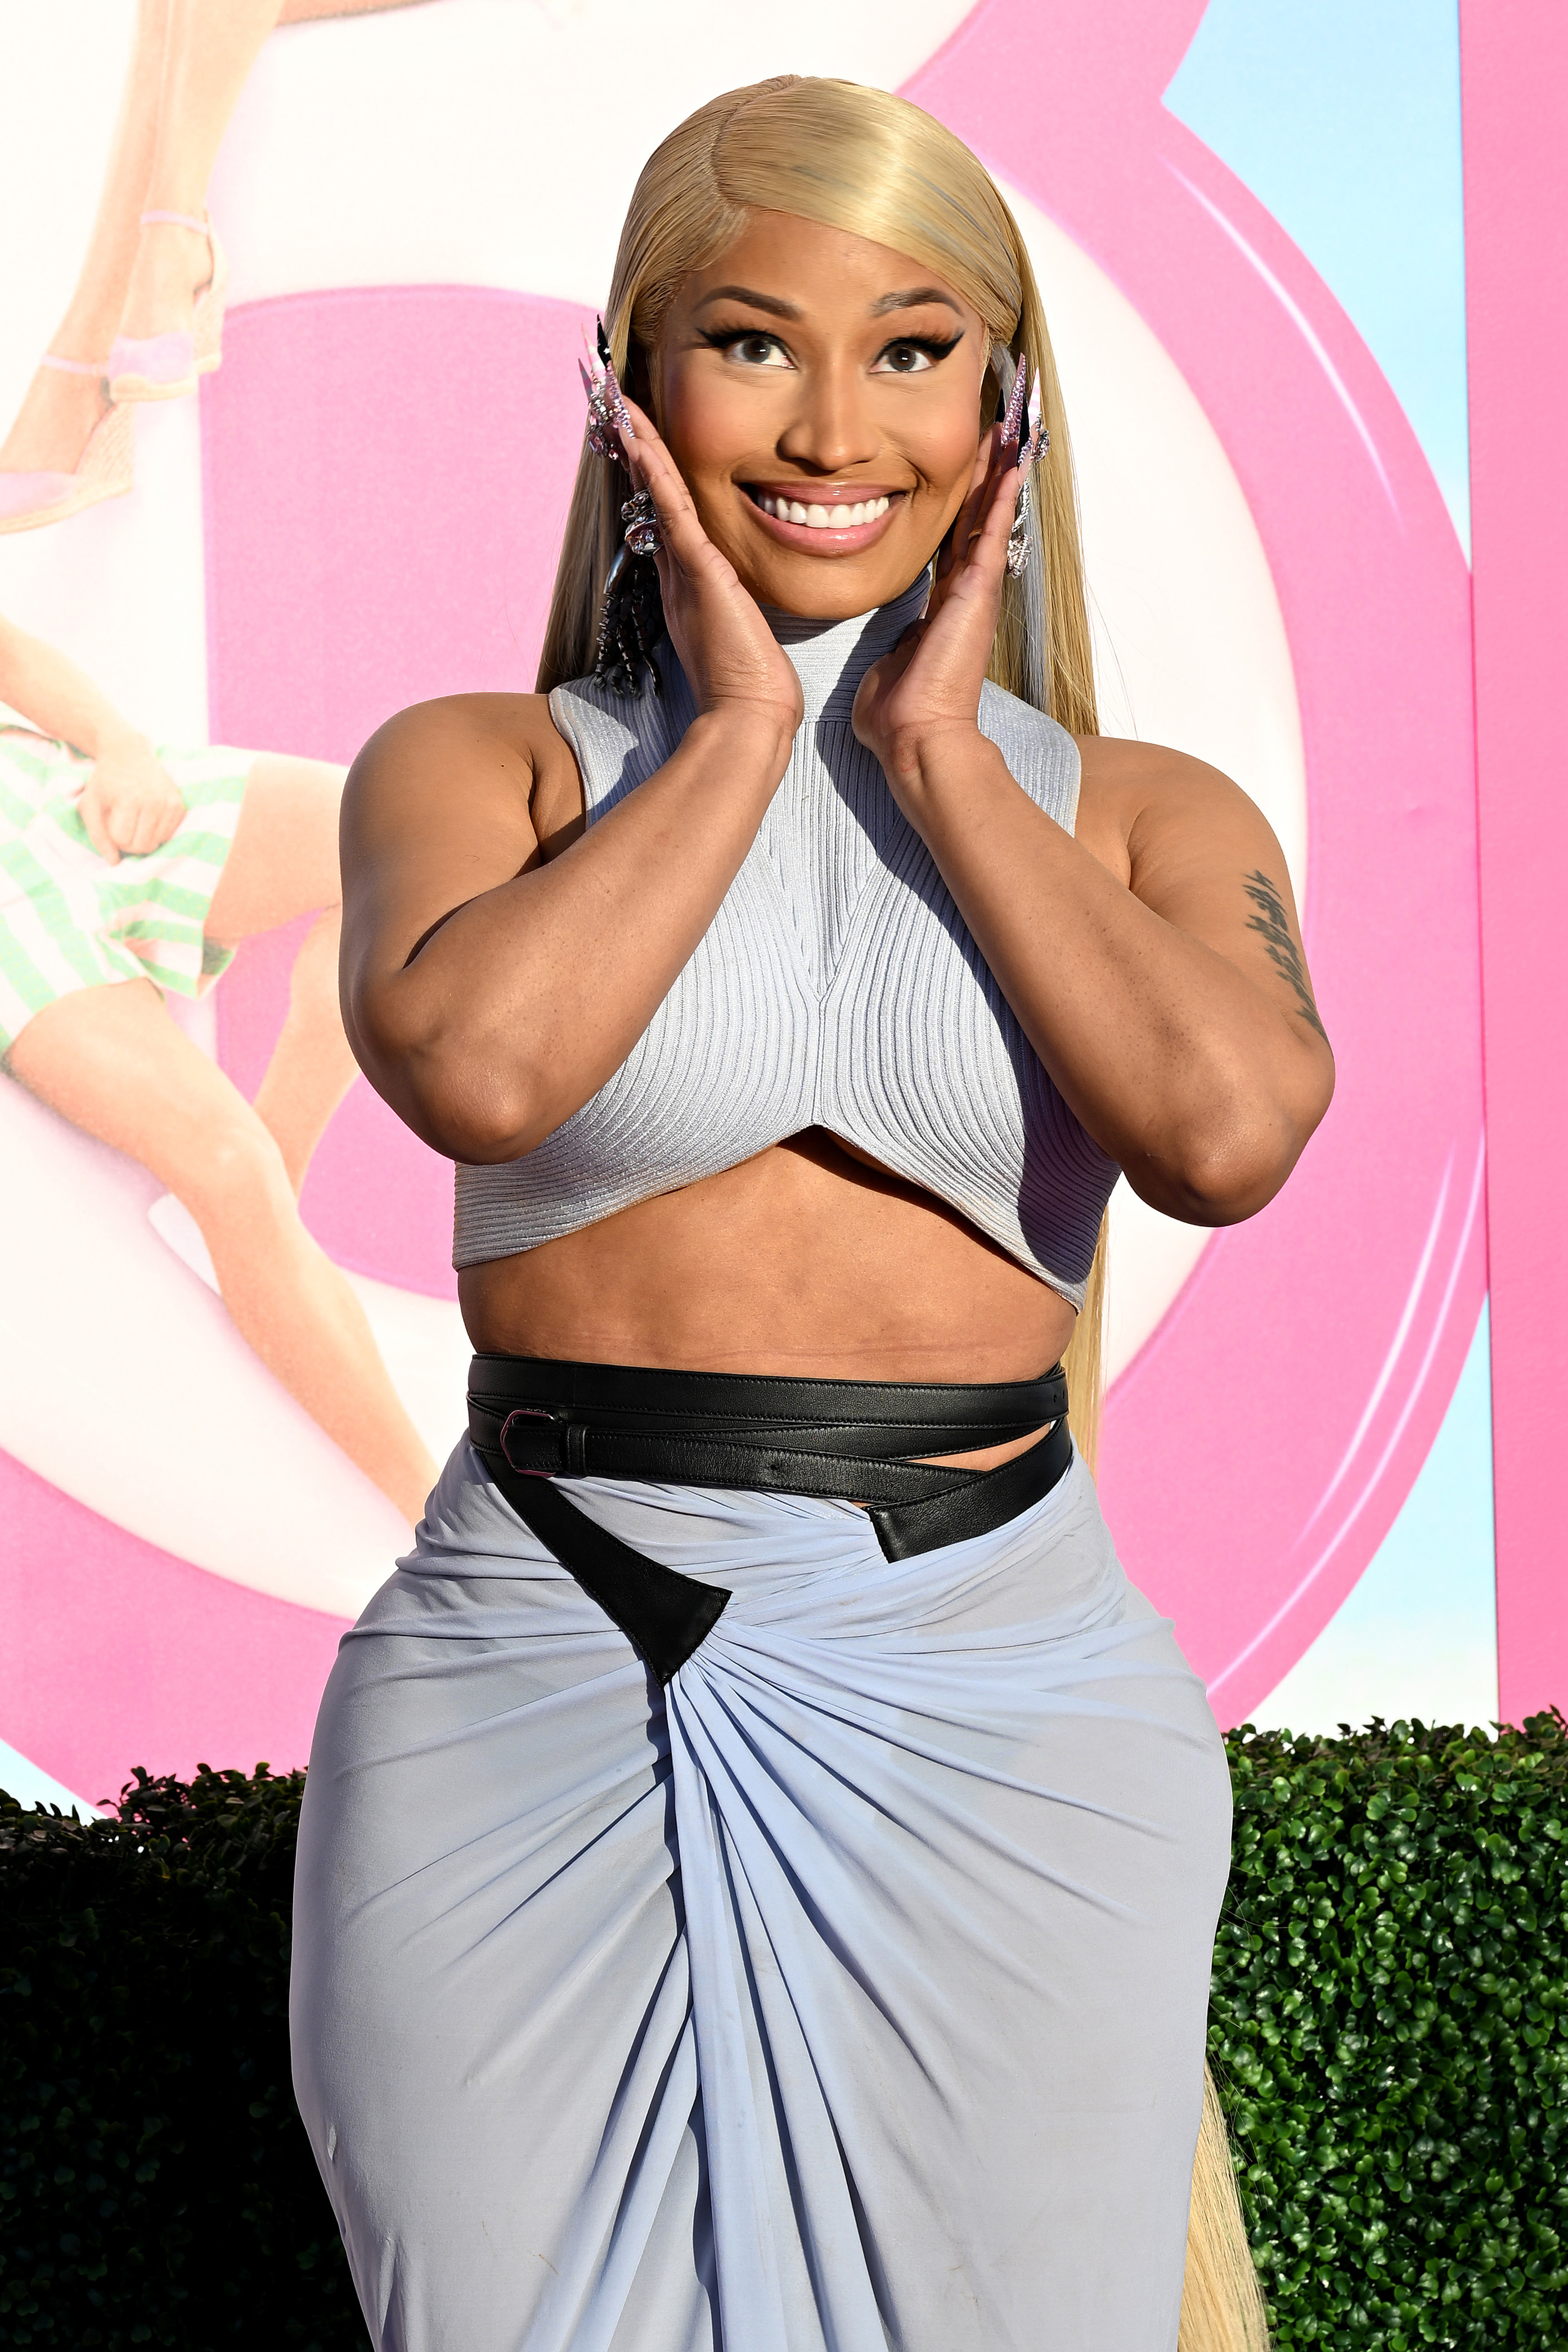 Nicki Minaj in a cropped top and high-waisted skirt, hands framing face, smiling